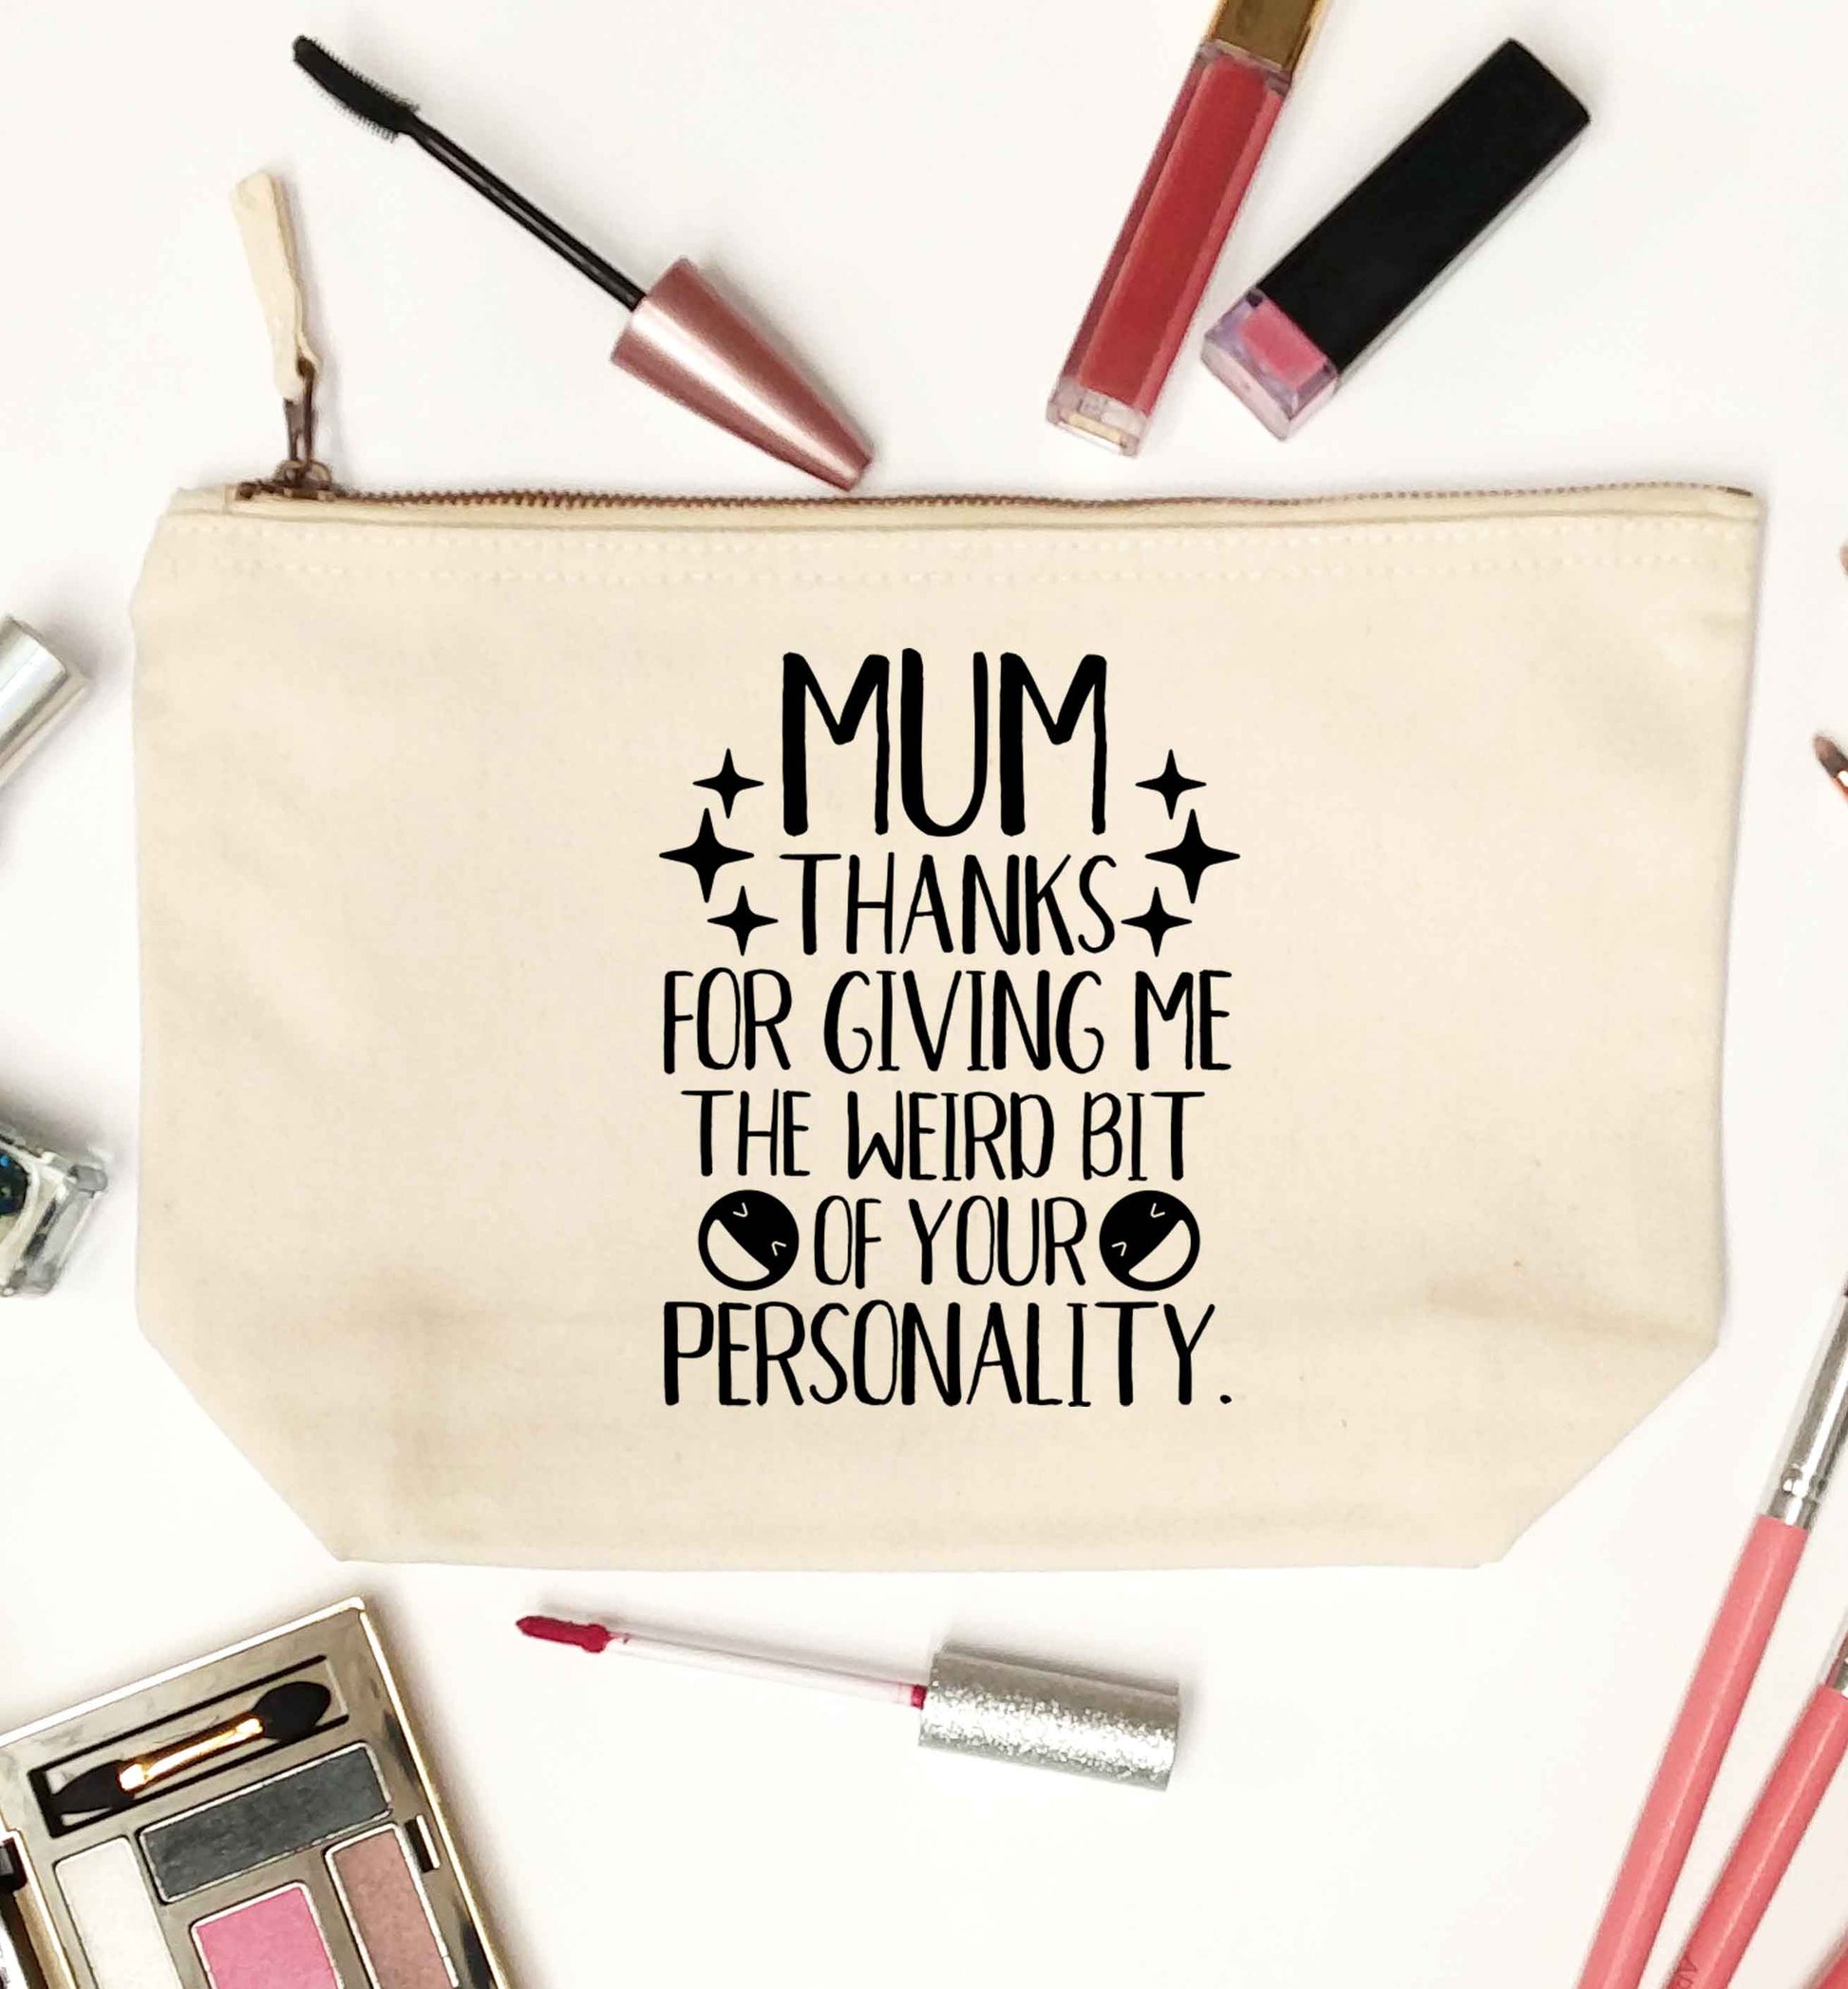 Mum thanks for giving me the weird bit of your personality natural makeup bag